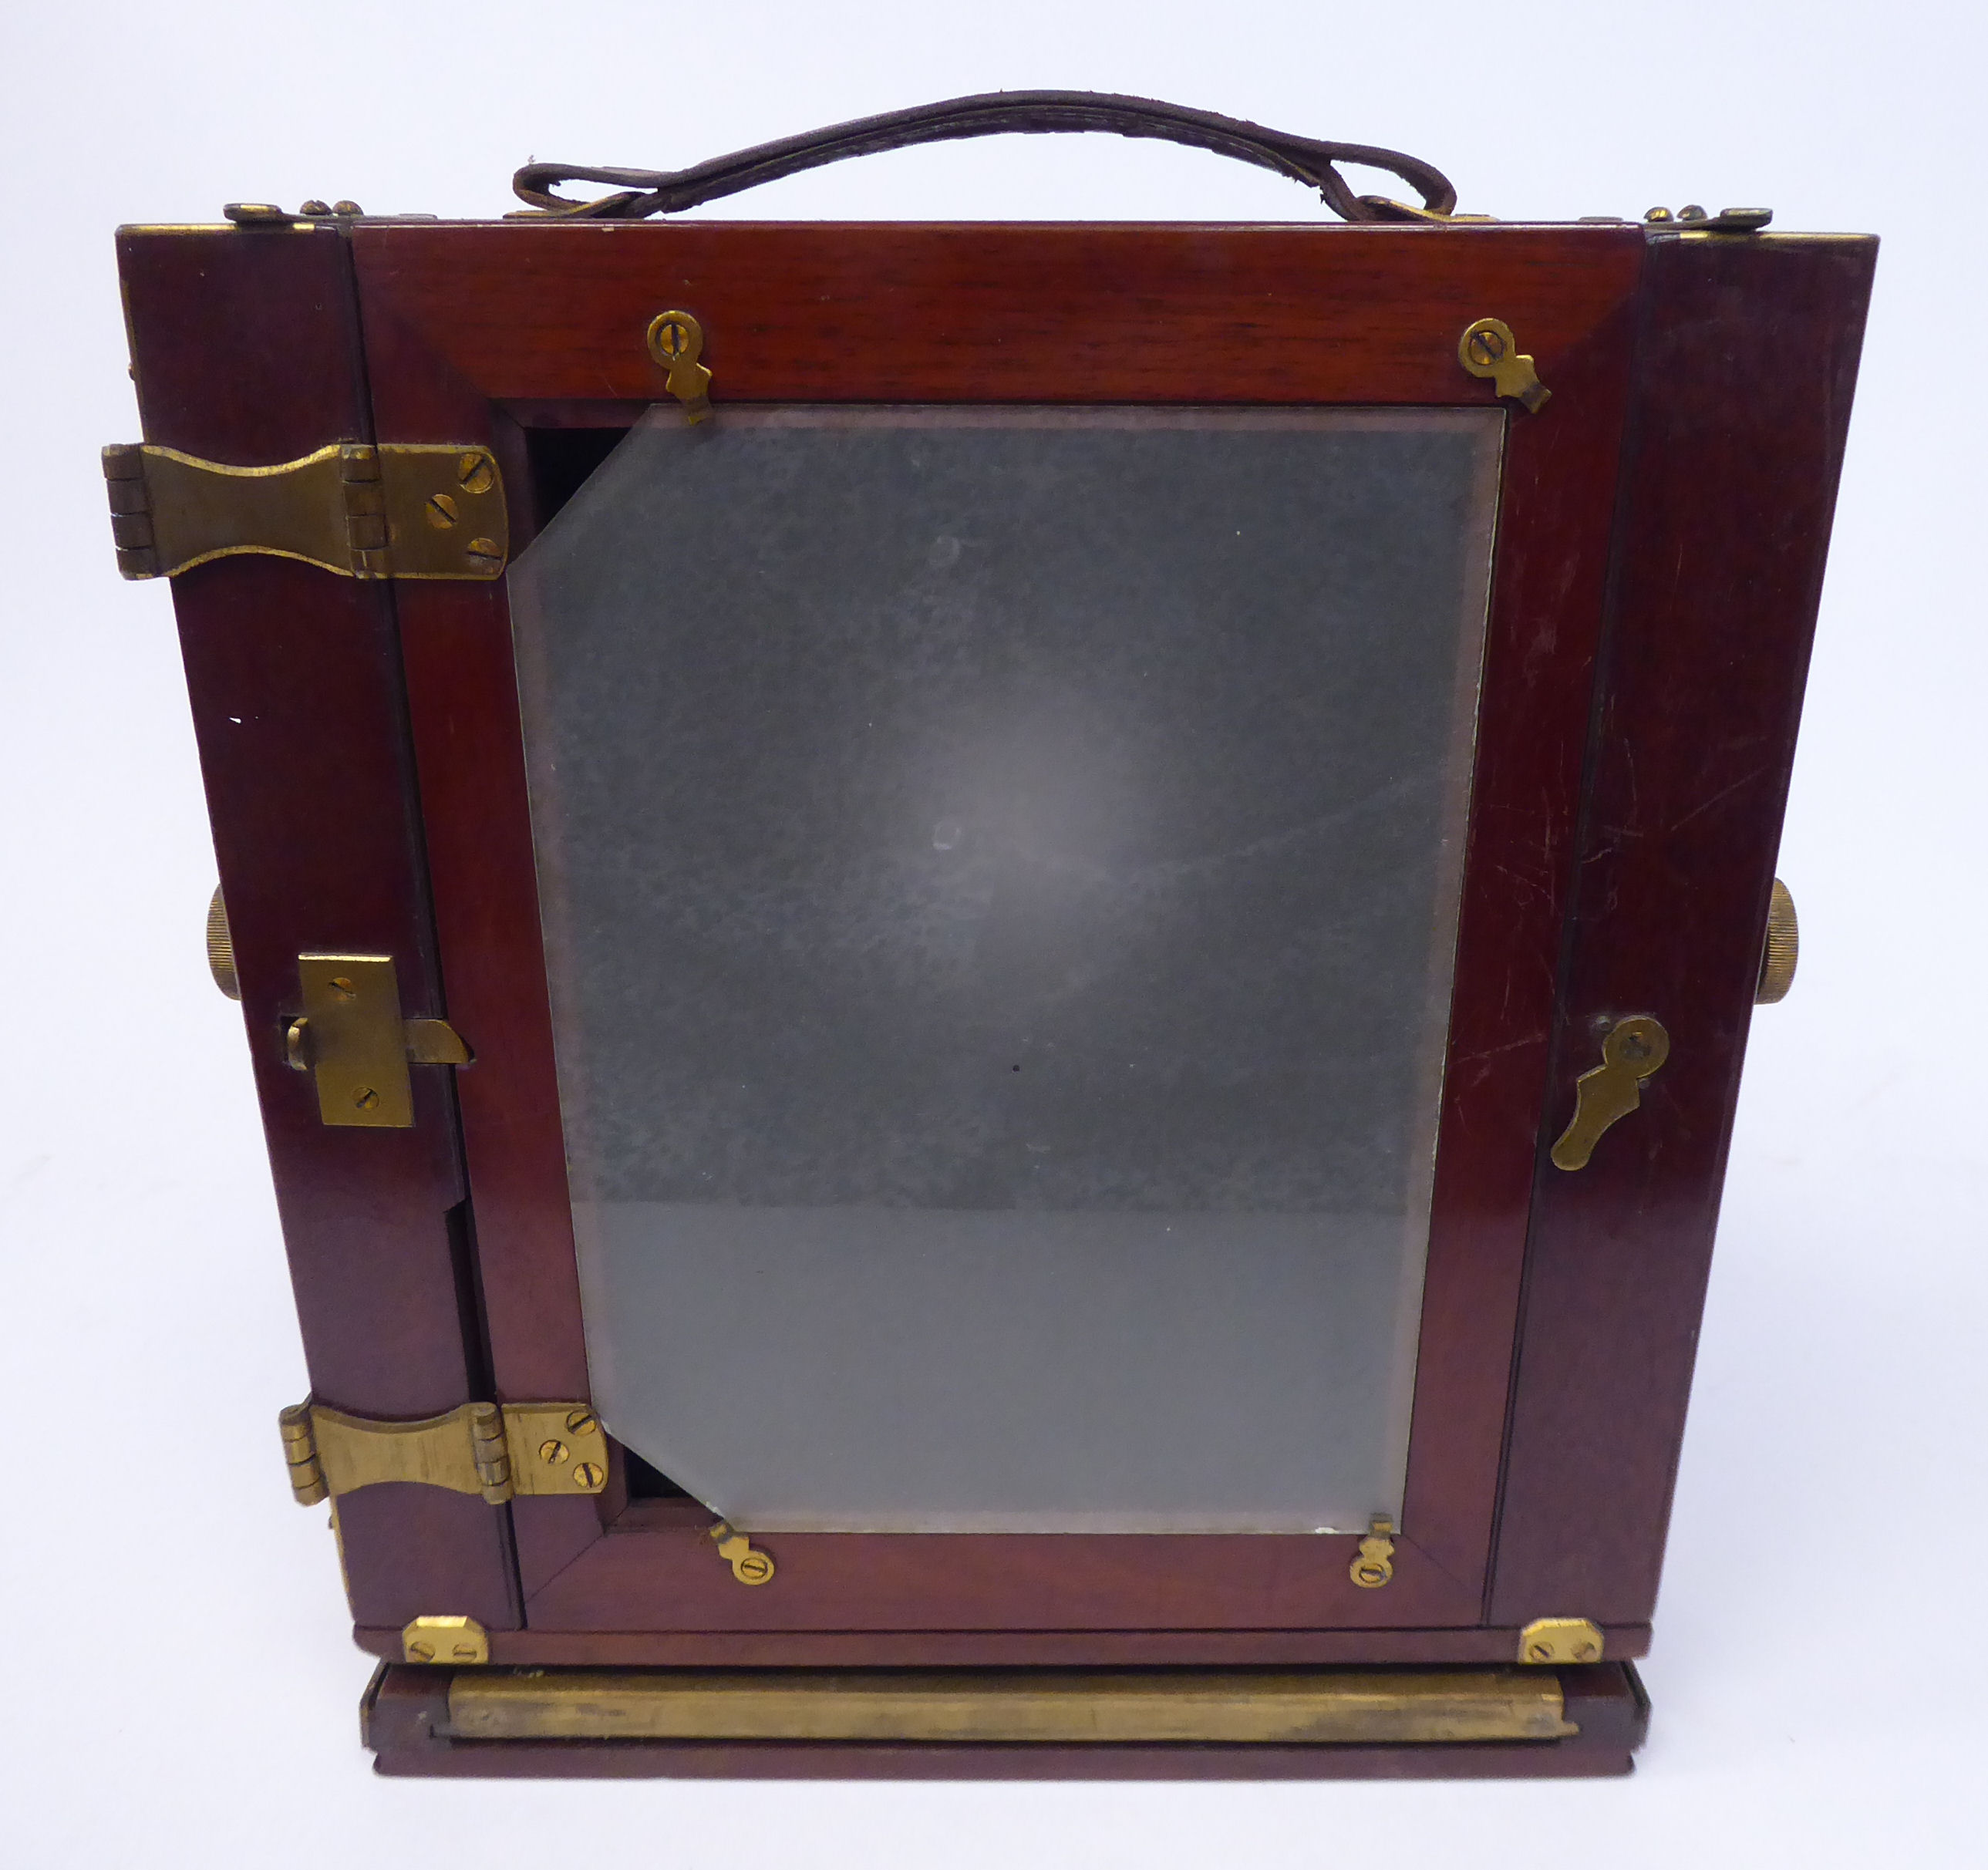 A late 19thC lacquered brass moulded mahogany plate camera with a cased Busch's Vadermecium Satz.No. - Image 4 of 12